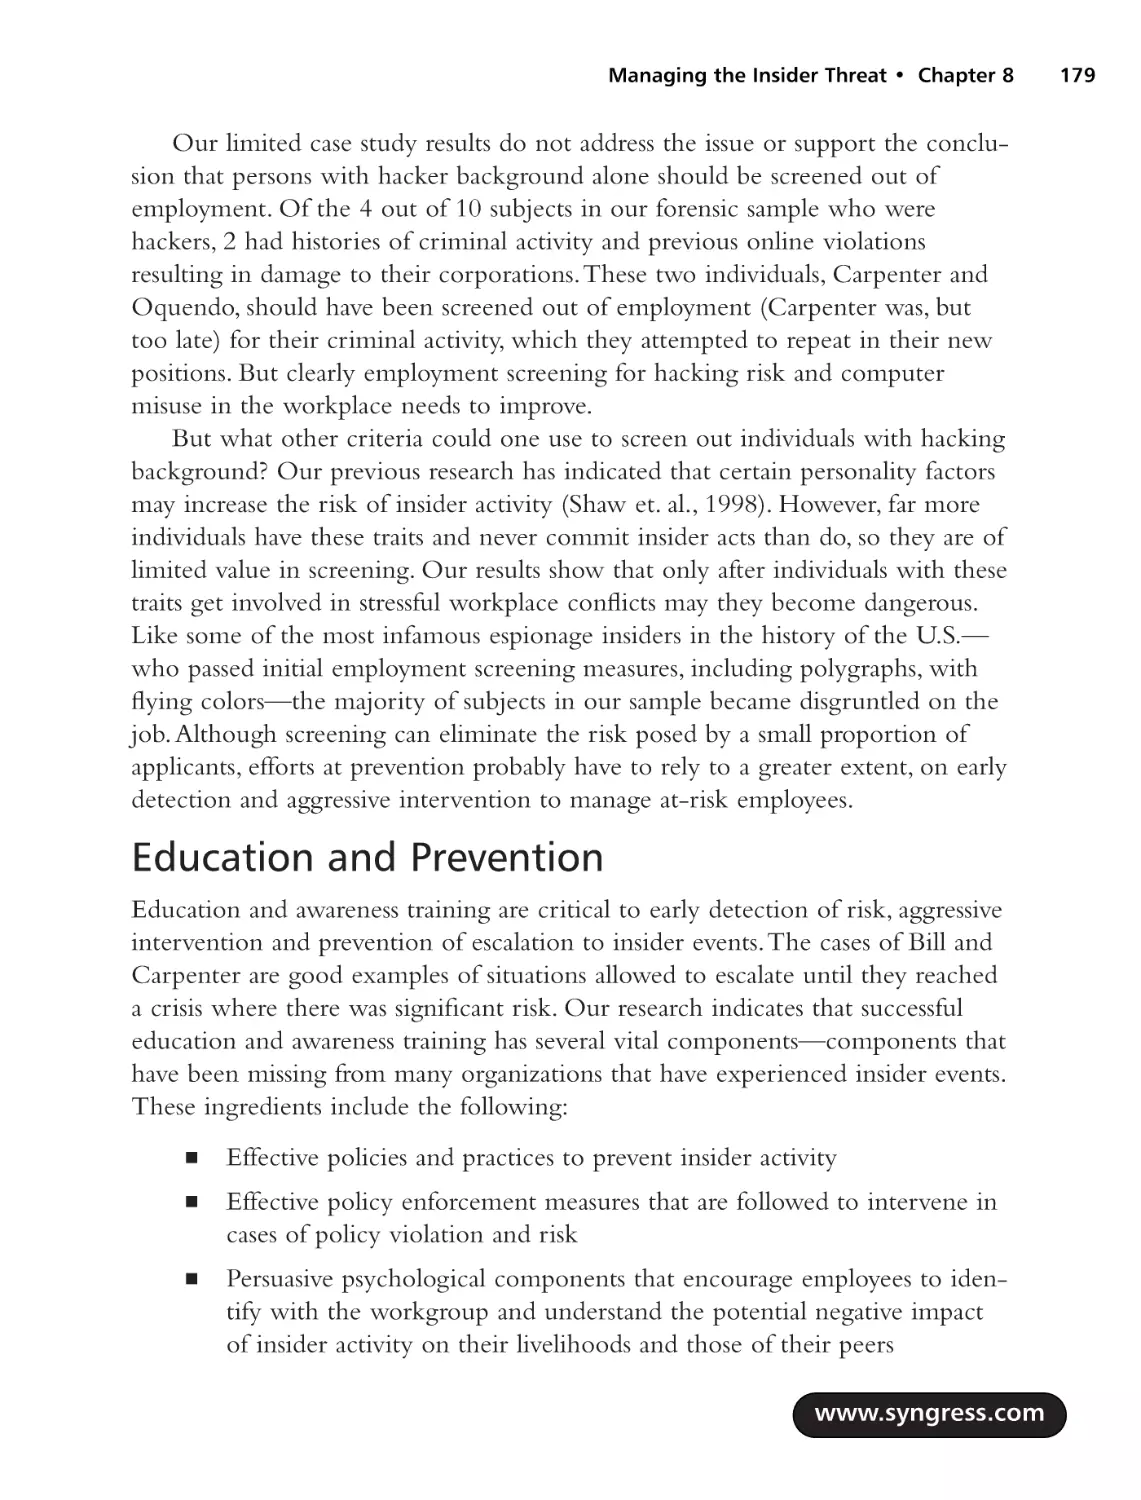 Education and Prevention